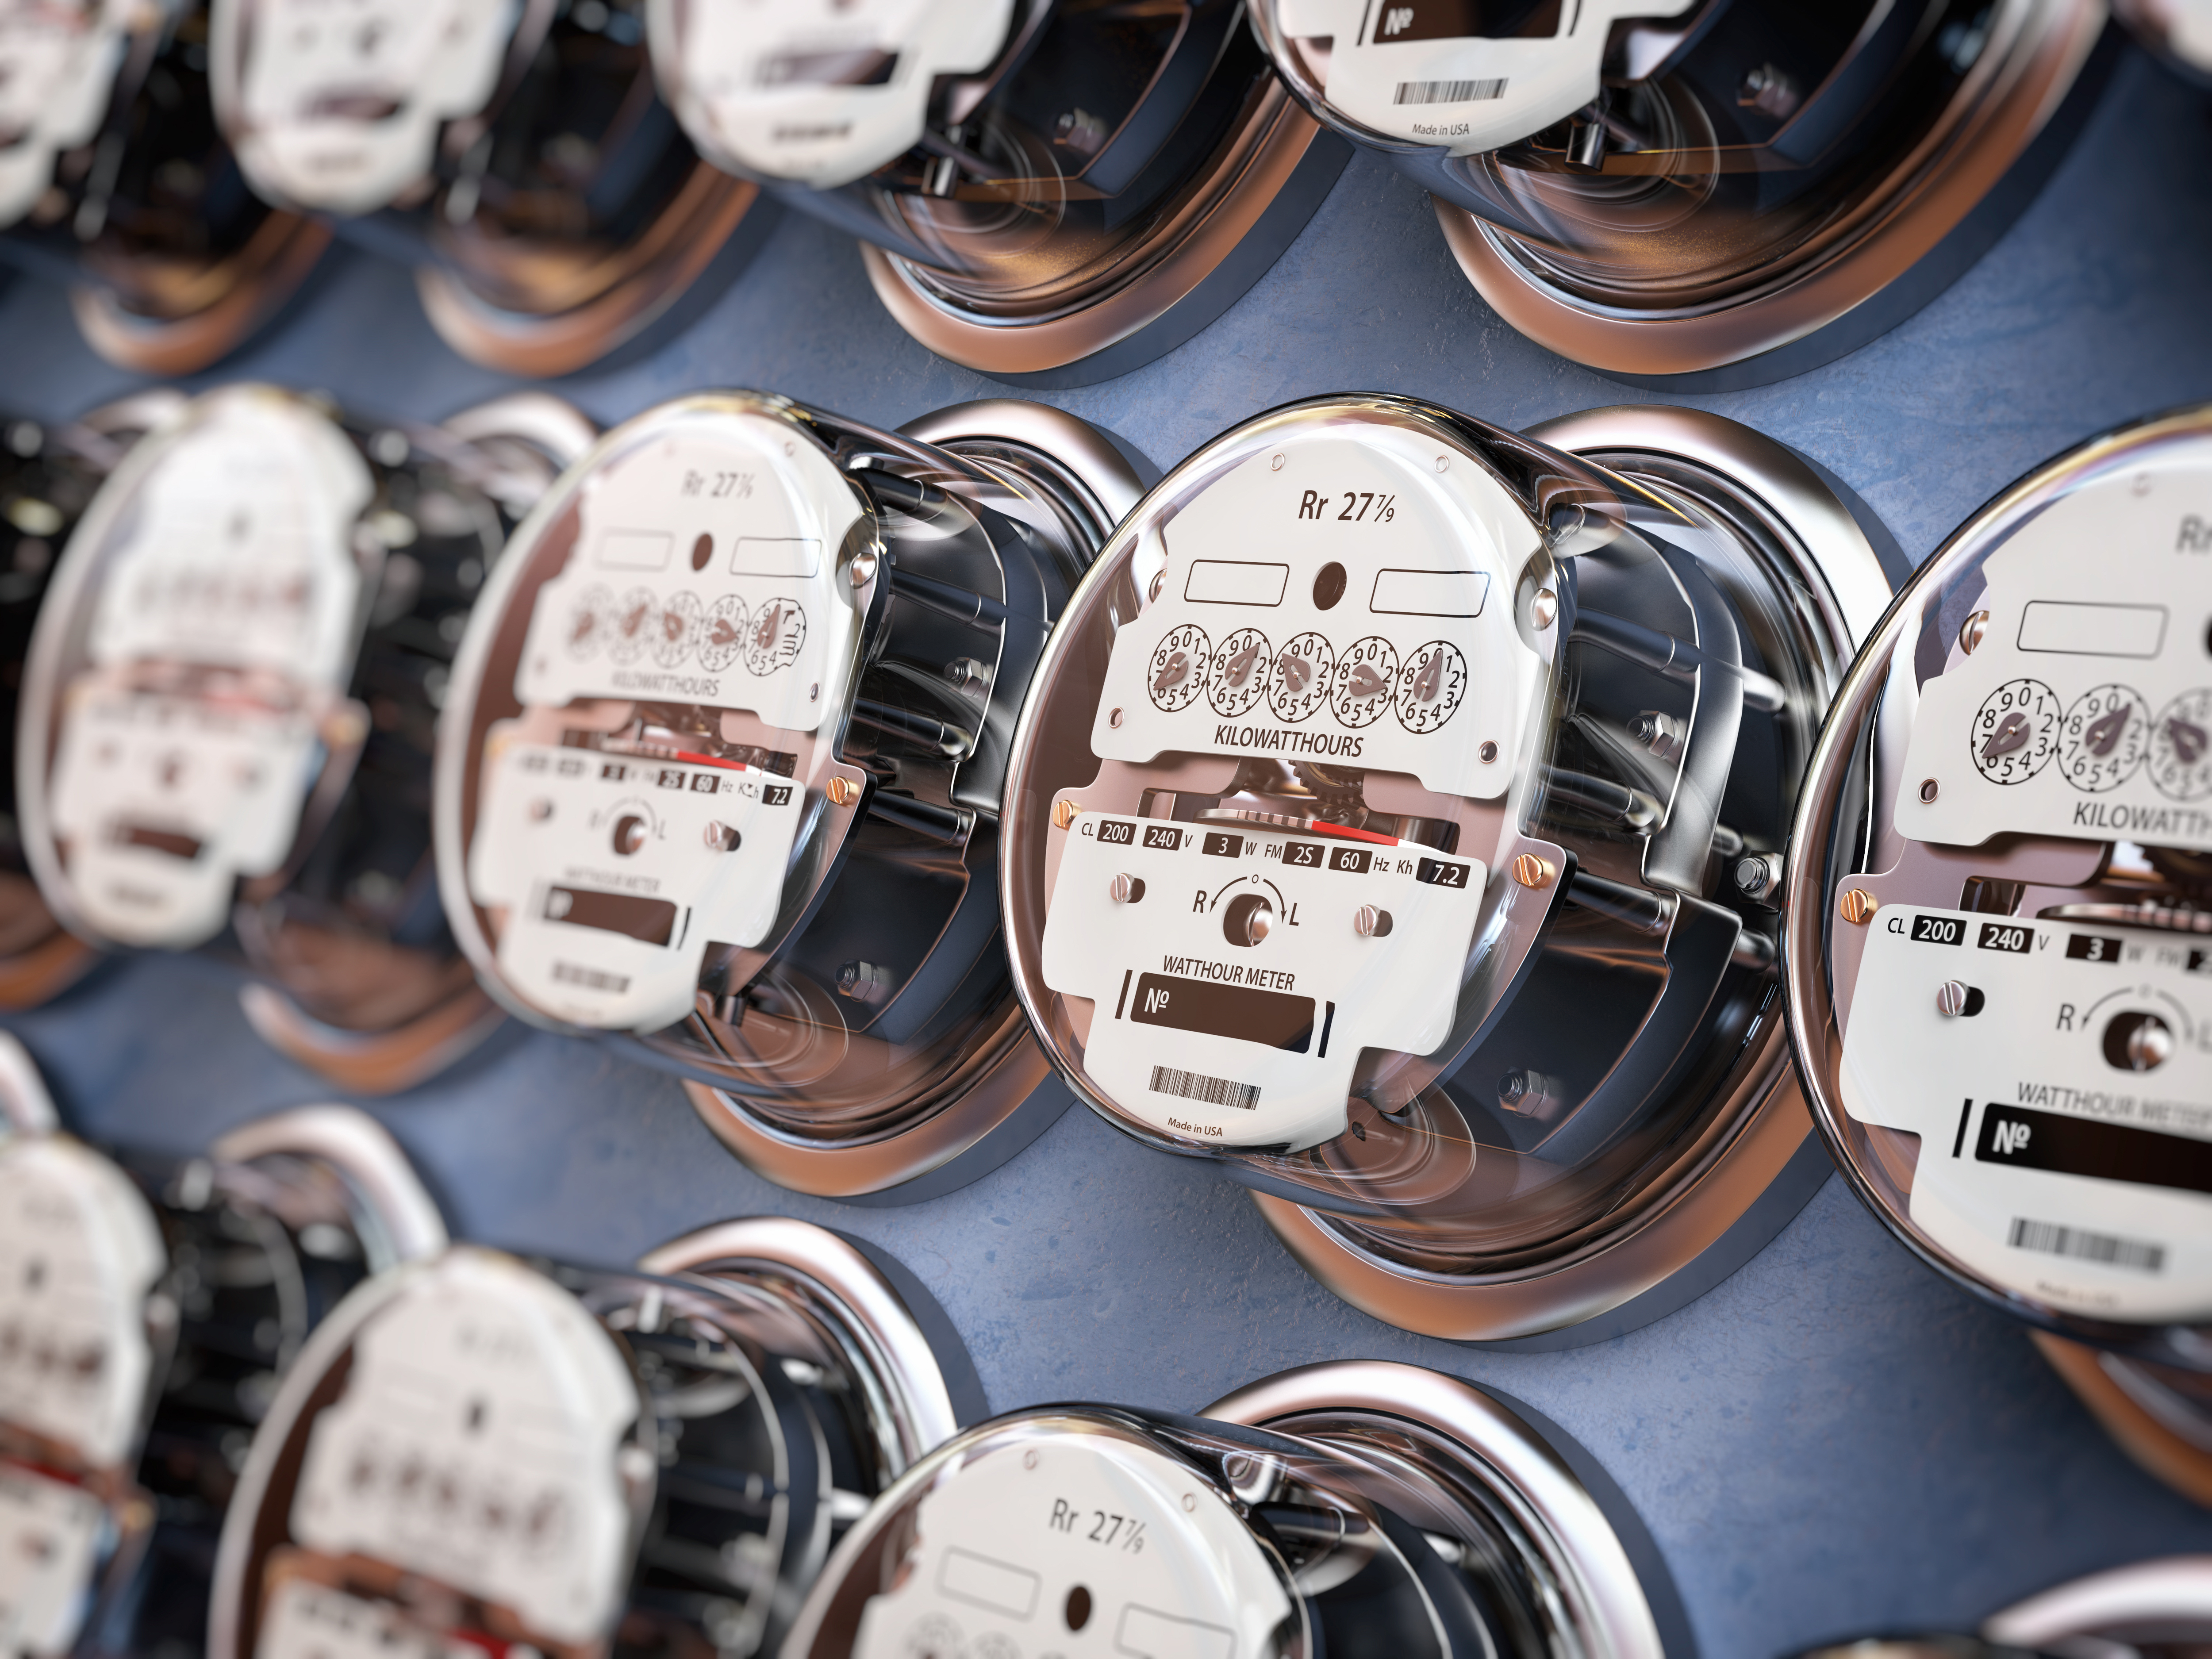 Rows of electricity meters.